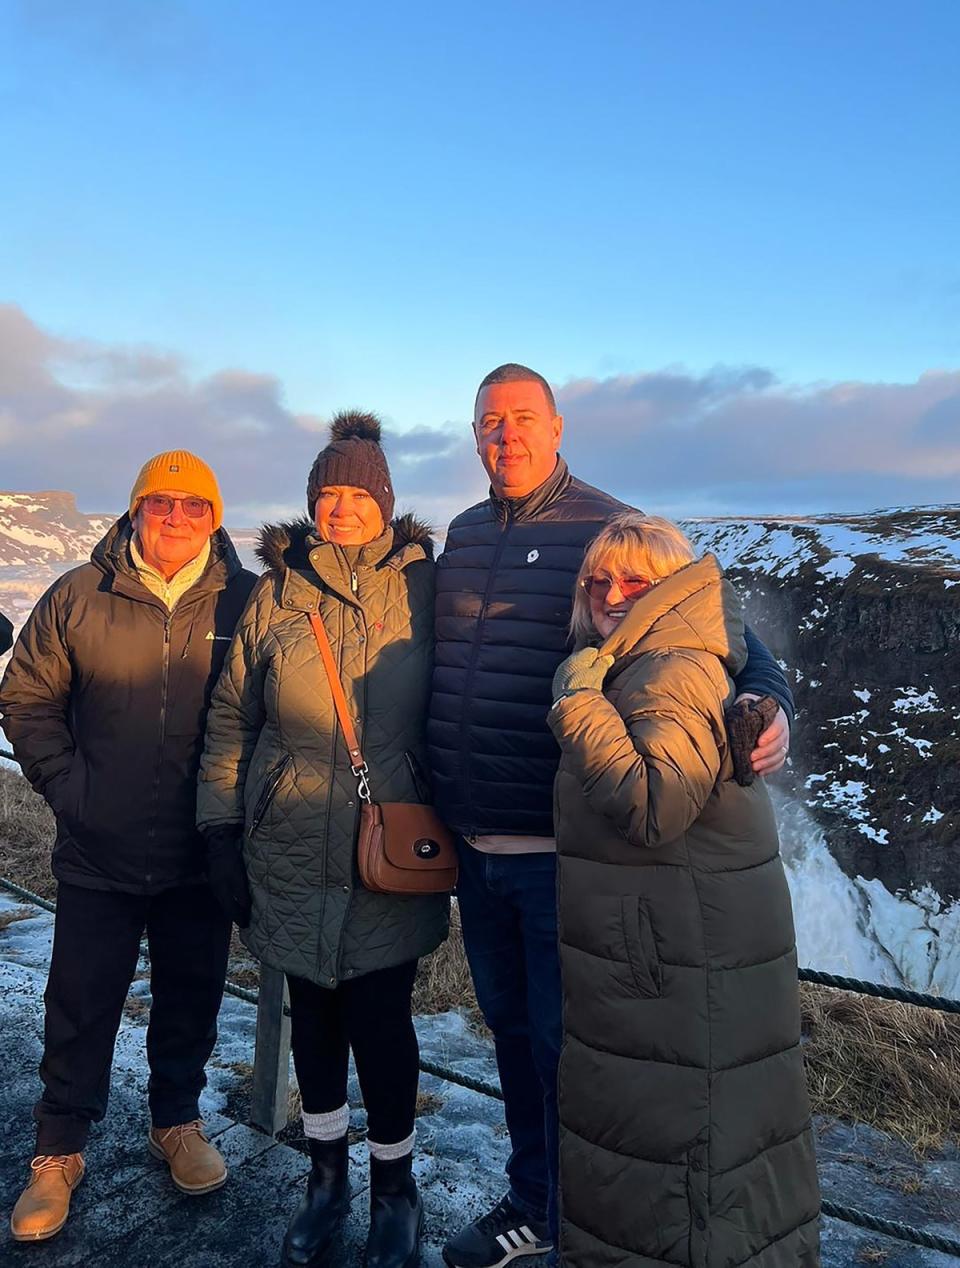 Lorraine Crawford (right) of herself with her husband John Crawford (left) and John’s cousin Michael Daltrey and Faye Daltrey saw the eruption on their way home to the airport (Lorraine Crawford/PA Wire)